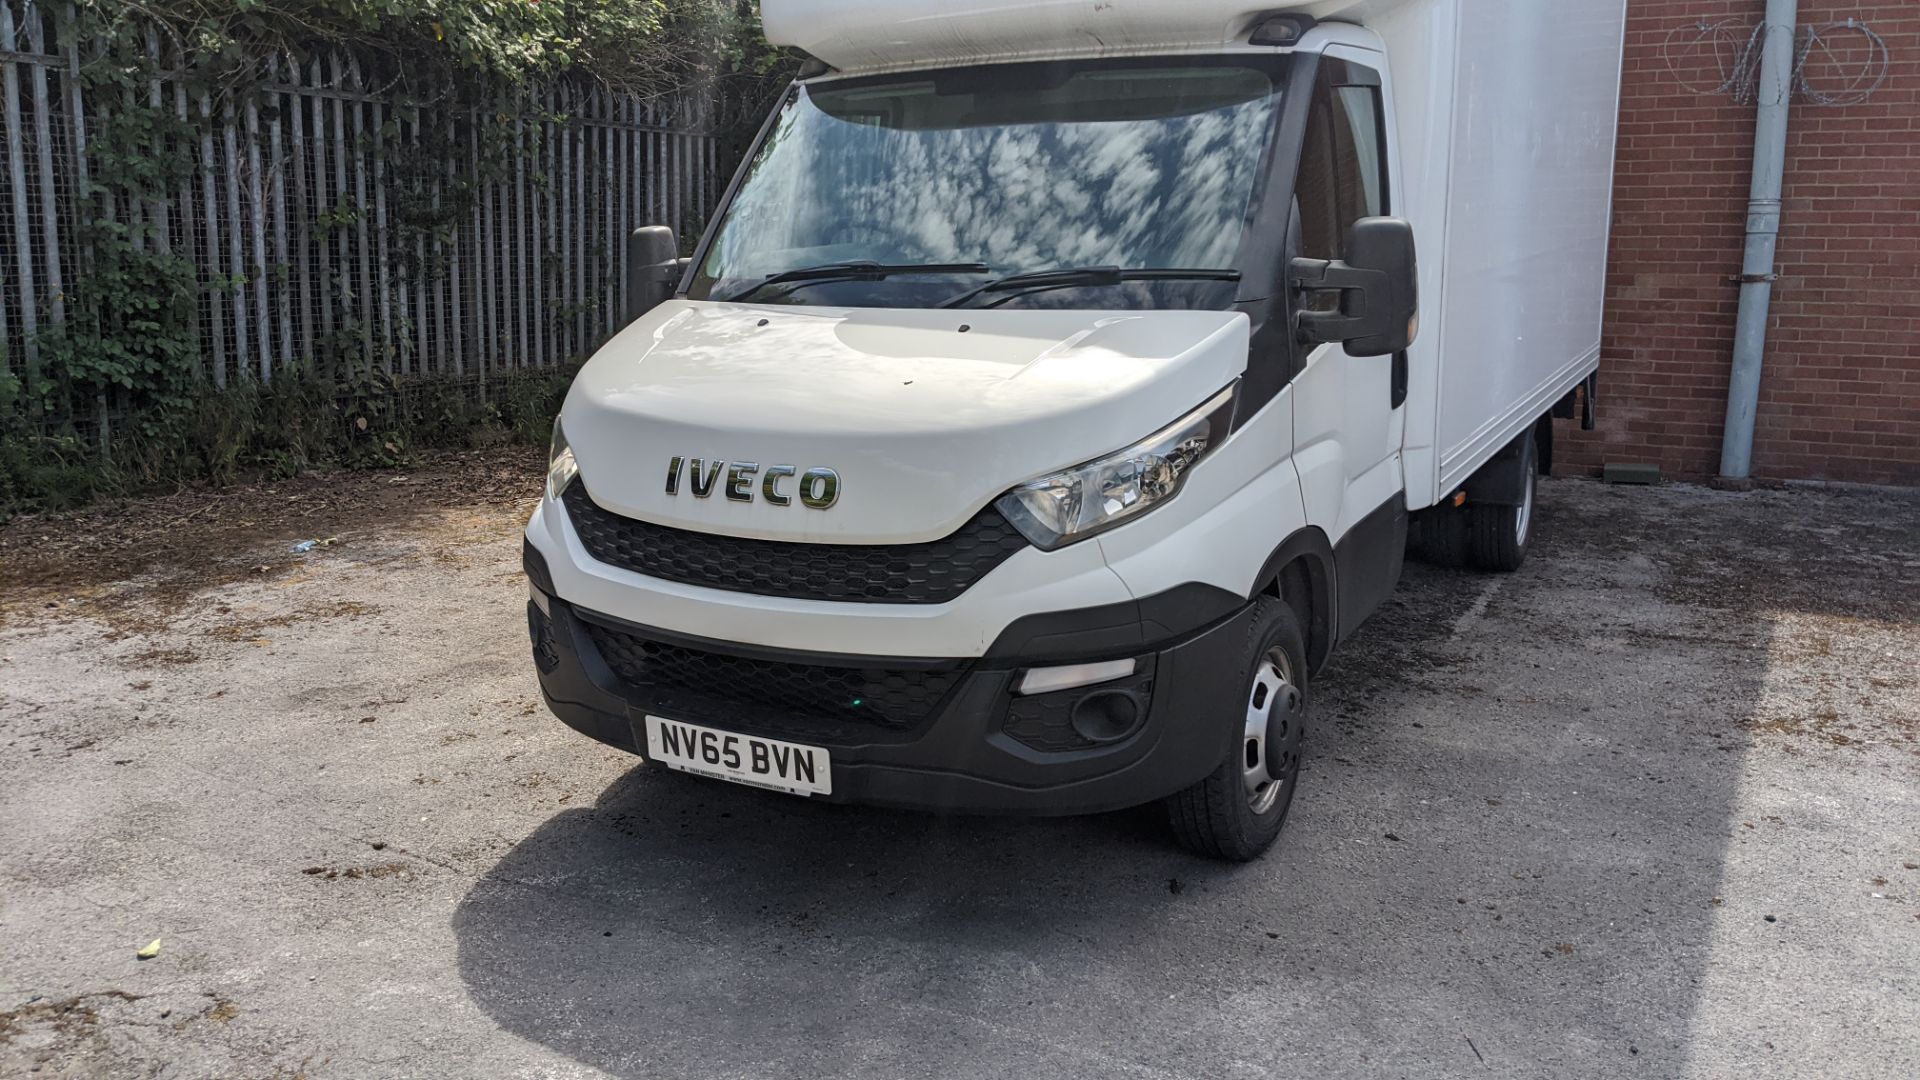 2015 Iveco Daily 35C13 Luton van with tail lift, registration NV65 BVN, 3500kg gross weight, - Image 3 of 34